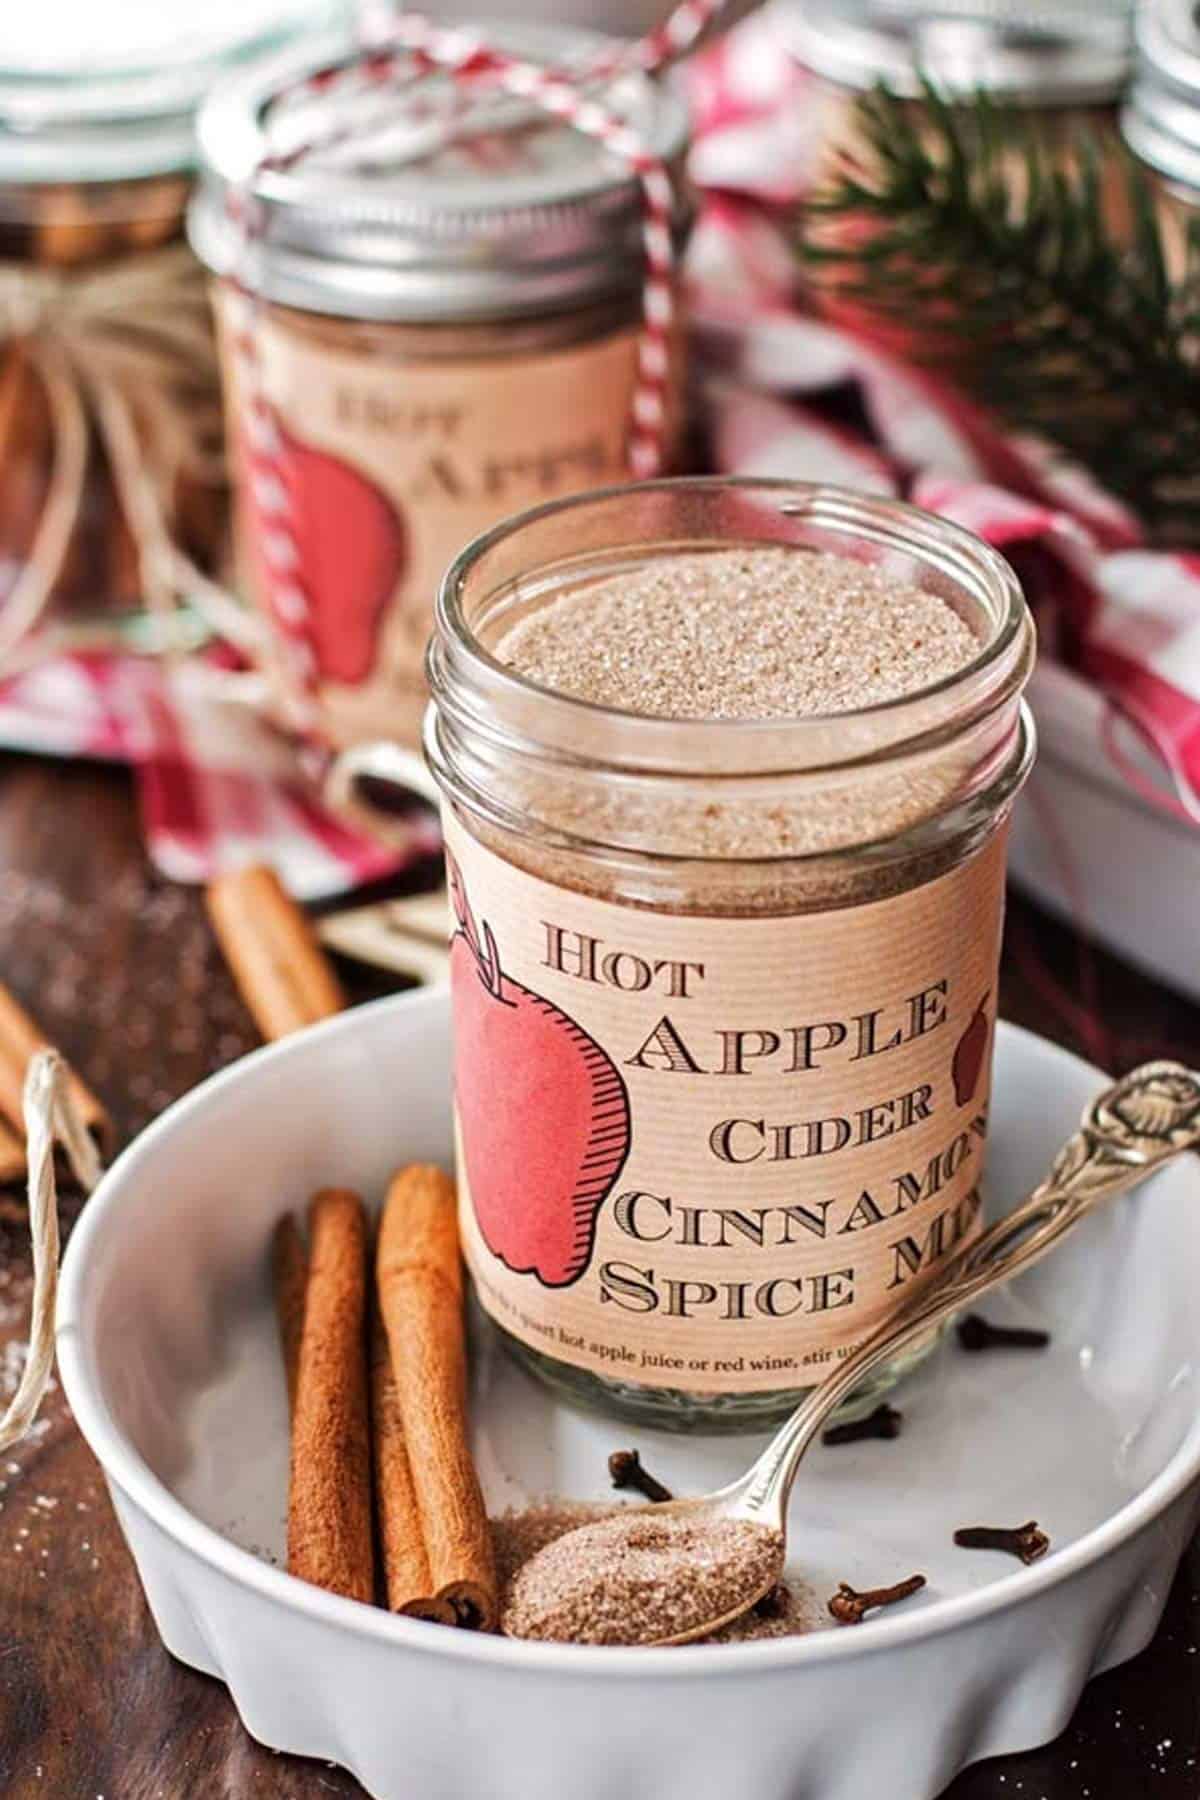 https://www.savorynothings.com/wp-content/uploads/2018/09/apple-cider-spice-mix-image-1.jpg